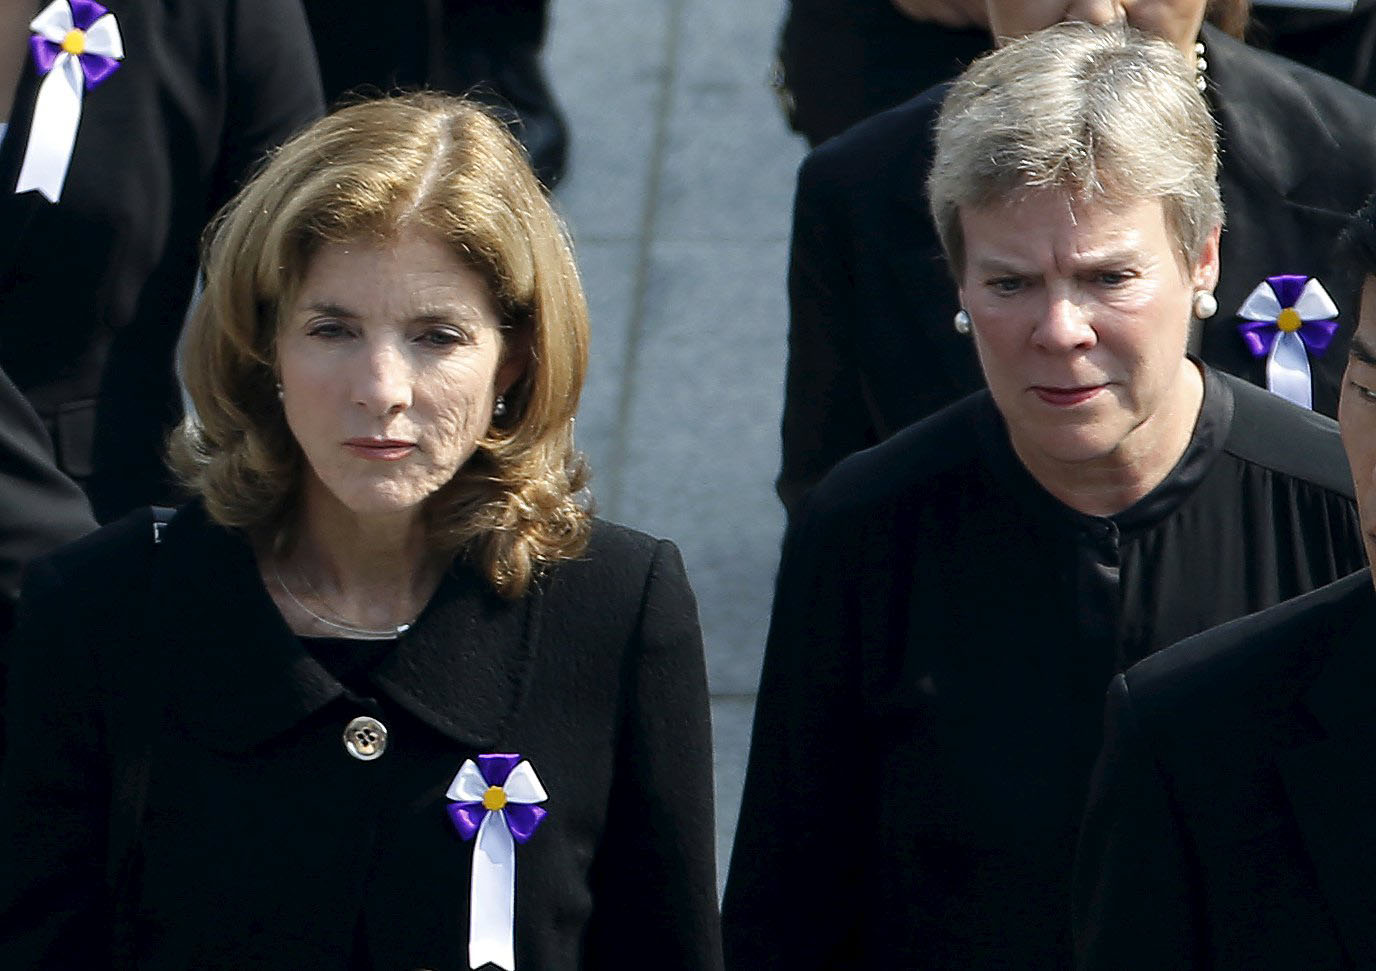 U.S. Ambassador to Japan Caroline Kennedy (left) and U.S. Under Secretary of State for Arms Control and International Security Rose Gottemoeller attend the ceremony at the Peace Memorial Park in Hiroshima on Thursday. | REUTERS